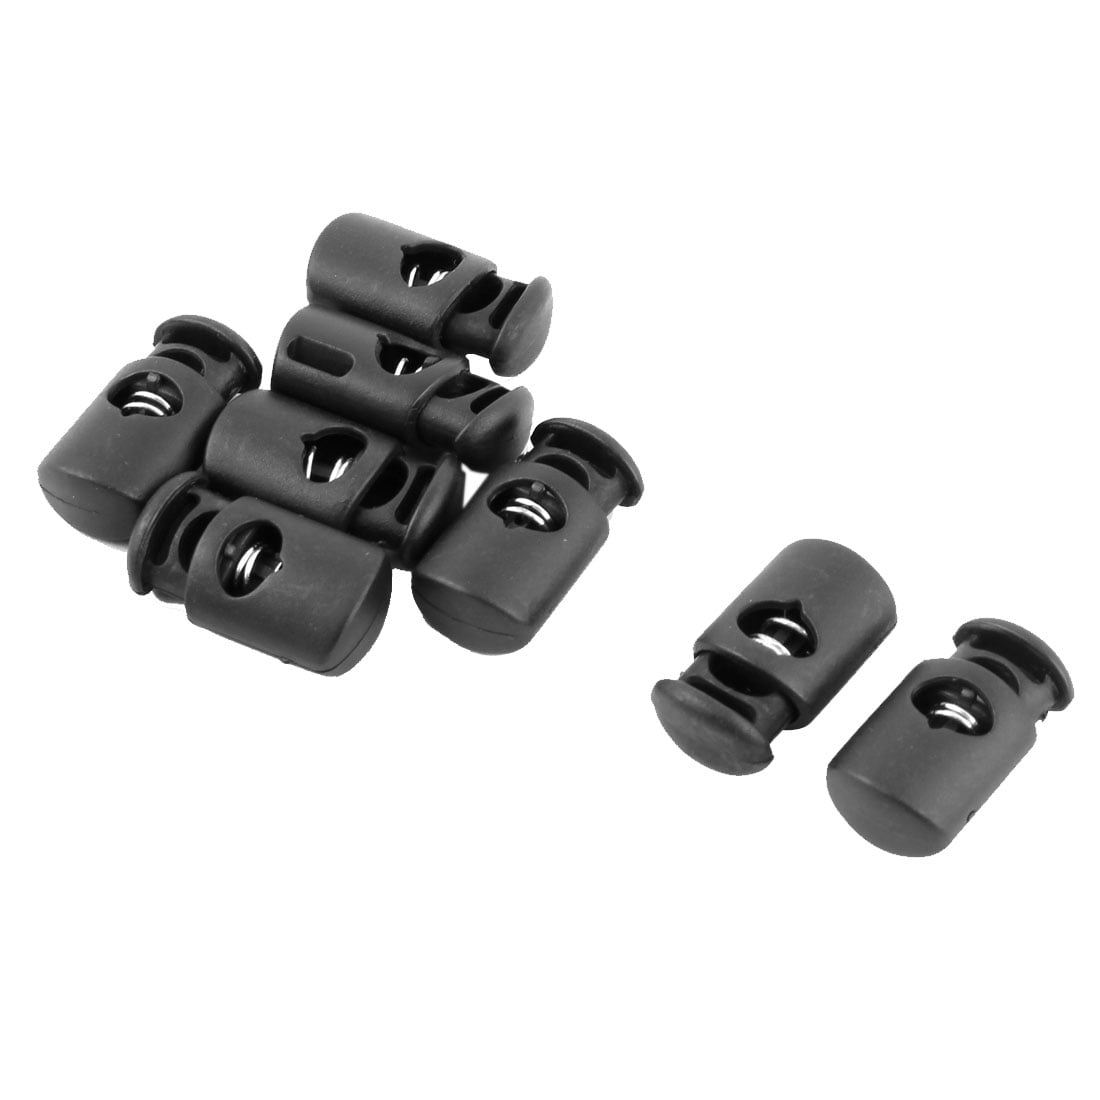 Accessories Double Hole Stoppers Stopper Cord DIY Metal Clamp Lock Toggle